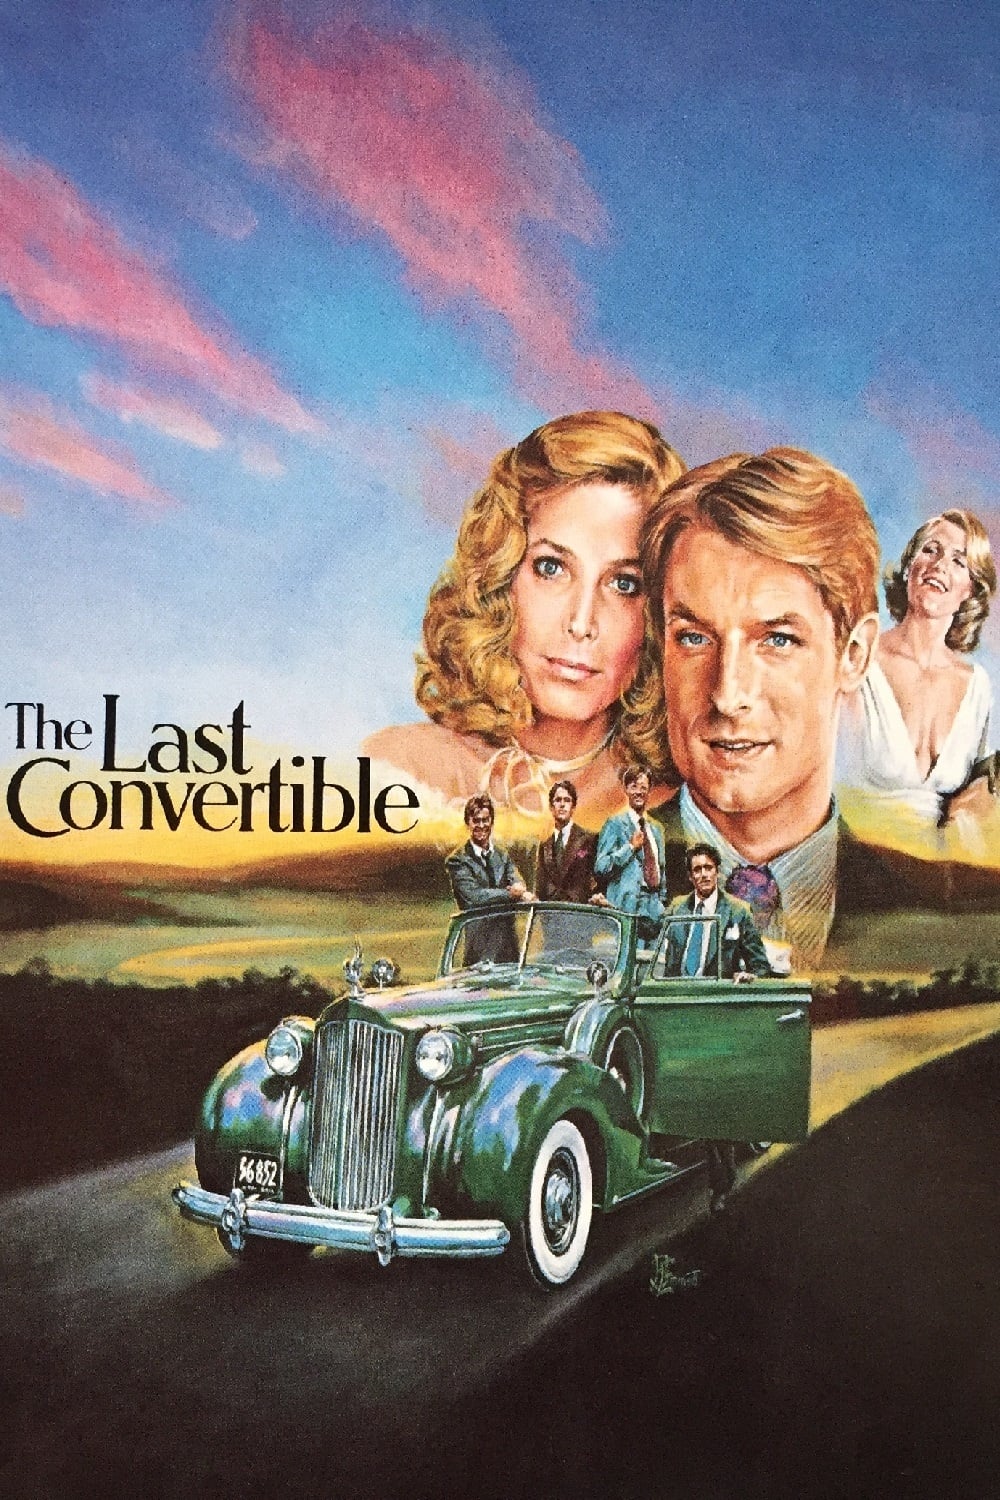 The Last Convertible (1979)